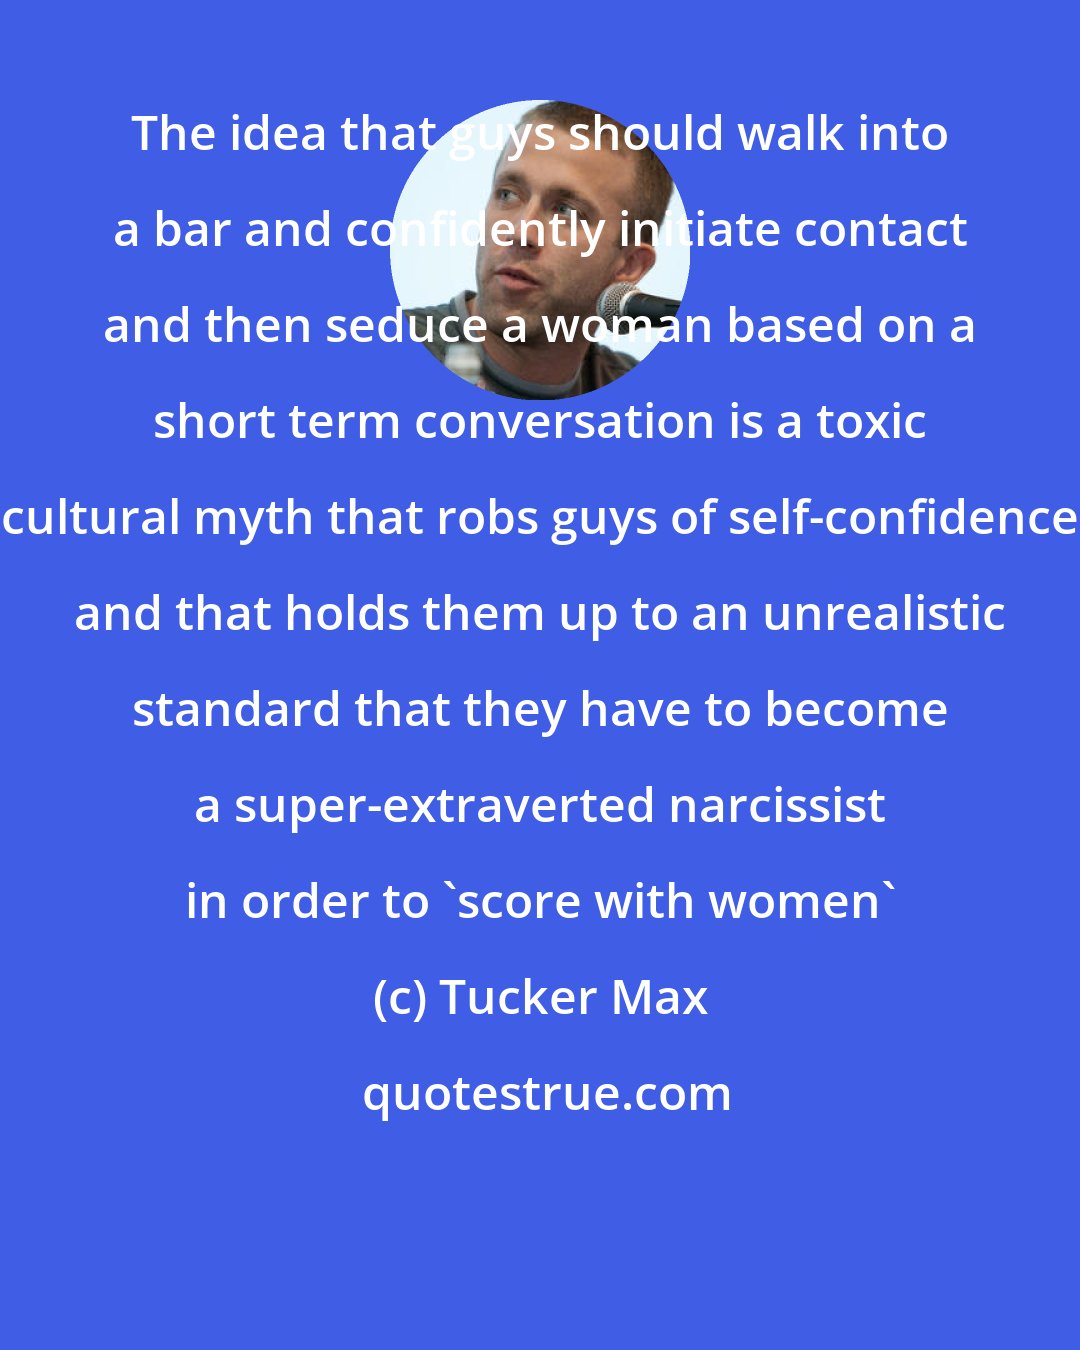 Tucker Max: The idea that guys should walk into a bar and confidently initiate contact and then seduce a woman based on a short term conversation is a toxic cultural myth that robs guys of self-confidence and that holds them up to an unrealistic standard that they have to become a super-extraverted narcissist in order to 'score with women'